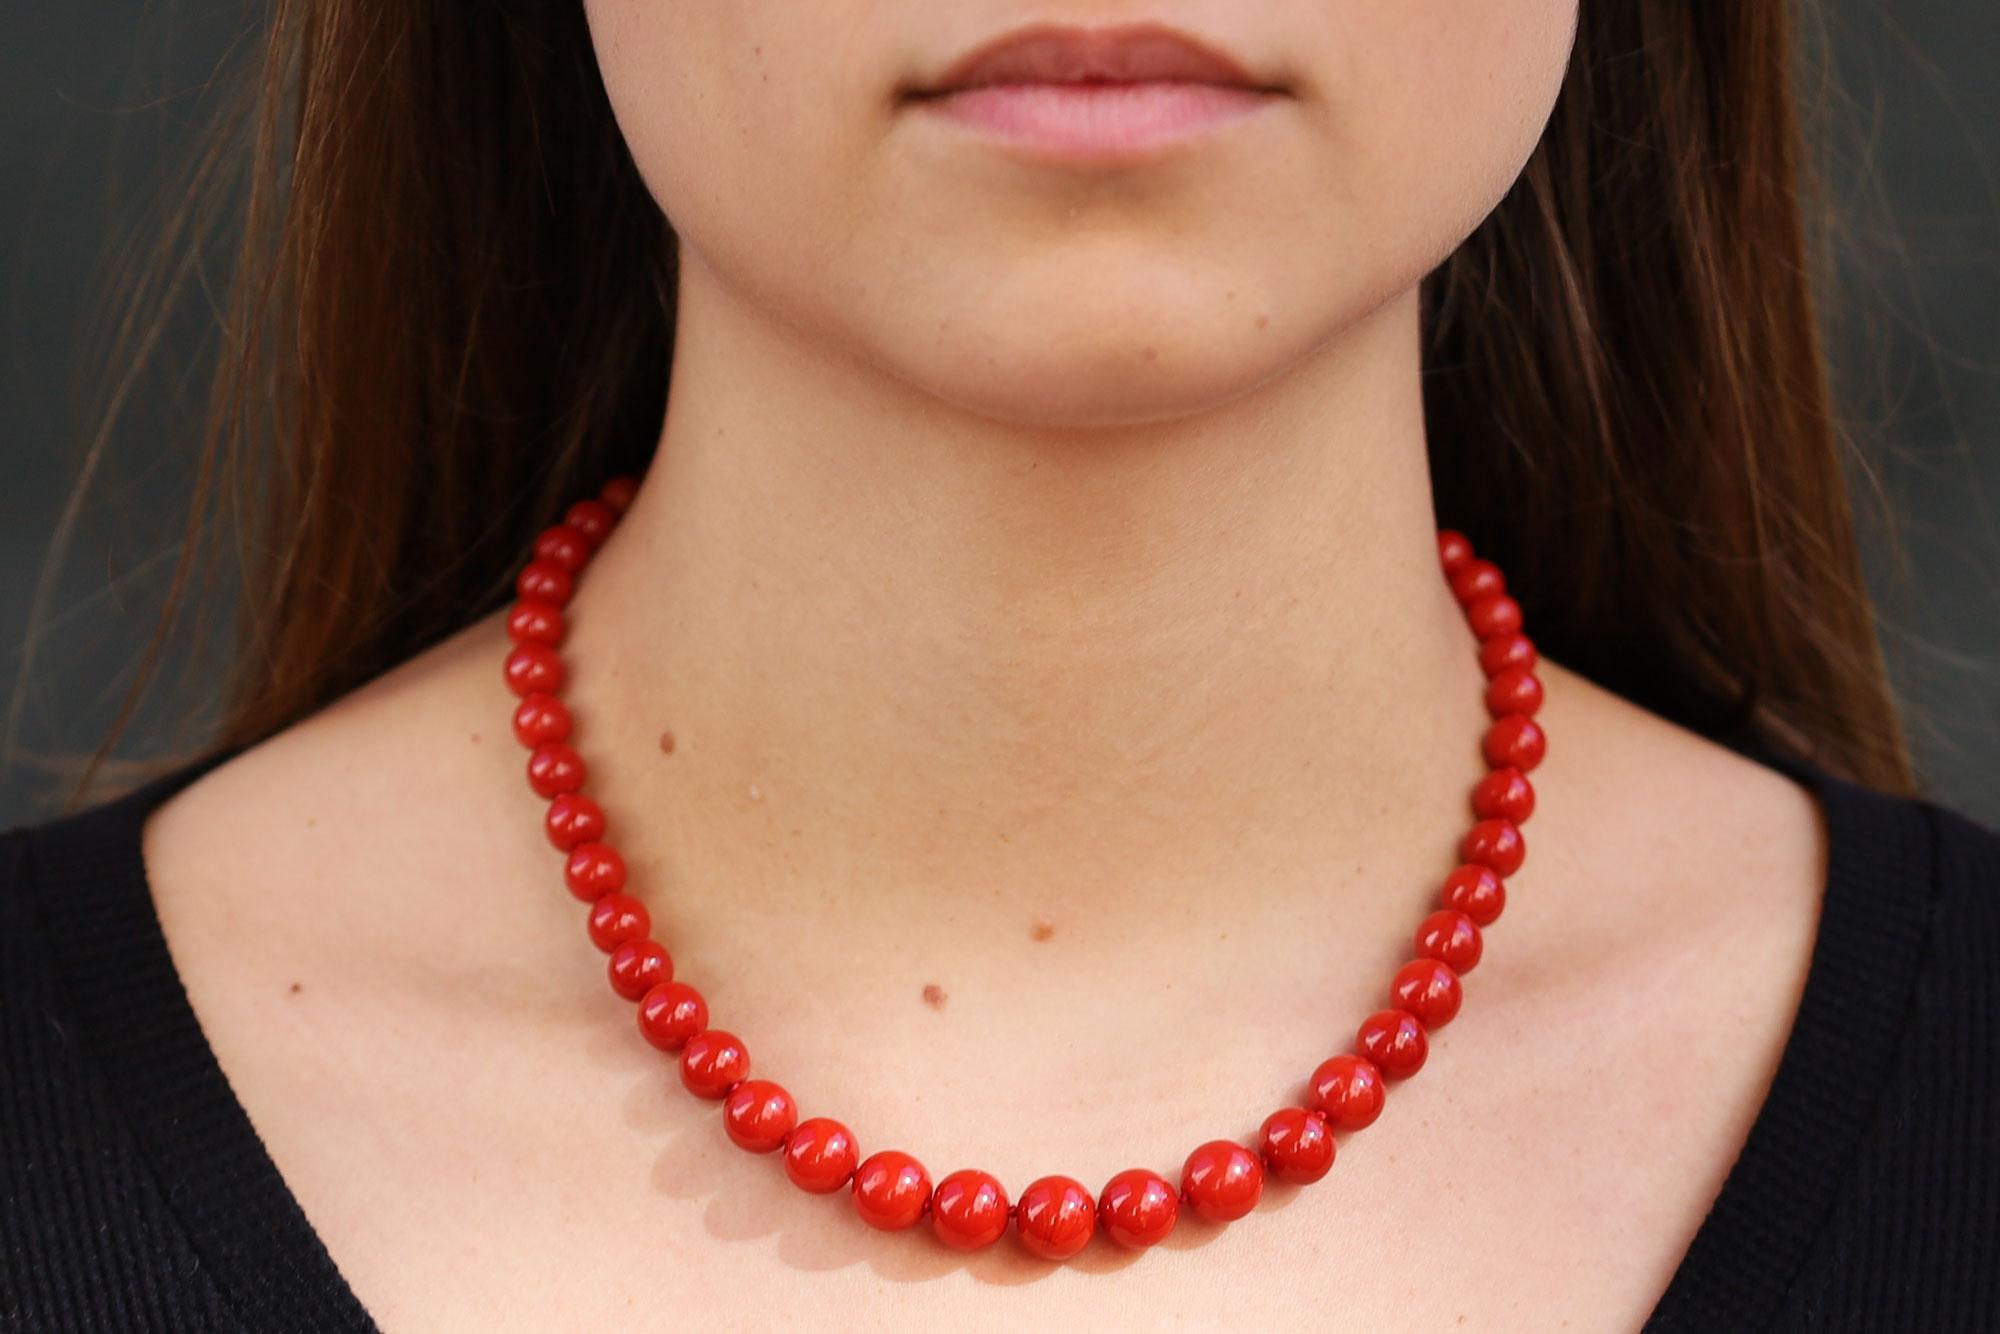 This antique Victorian era Mediterranean coral necklace is lively with old world charm and retro Hollywood glam. 44 natural ox blood coral beads are well matched in a graduated layout, undyed and rich with a deep red hue. In excellent condition,